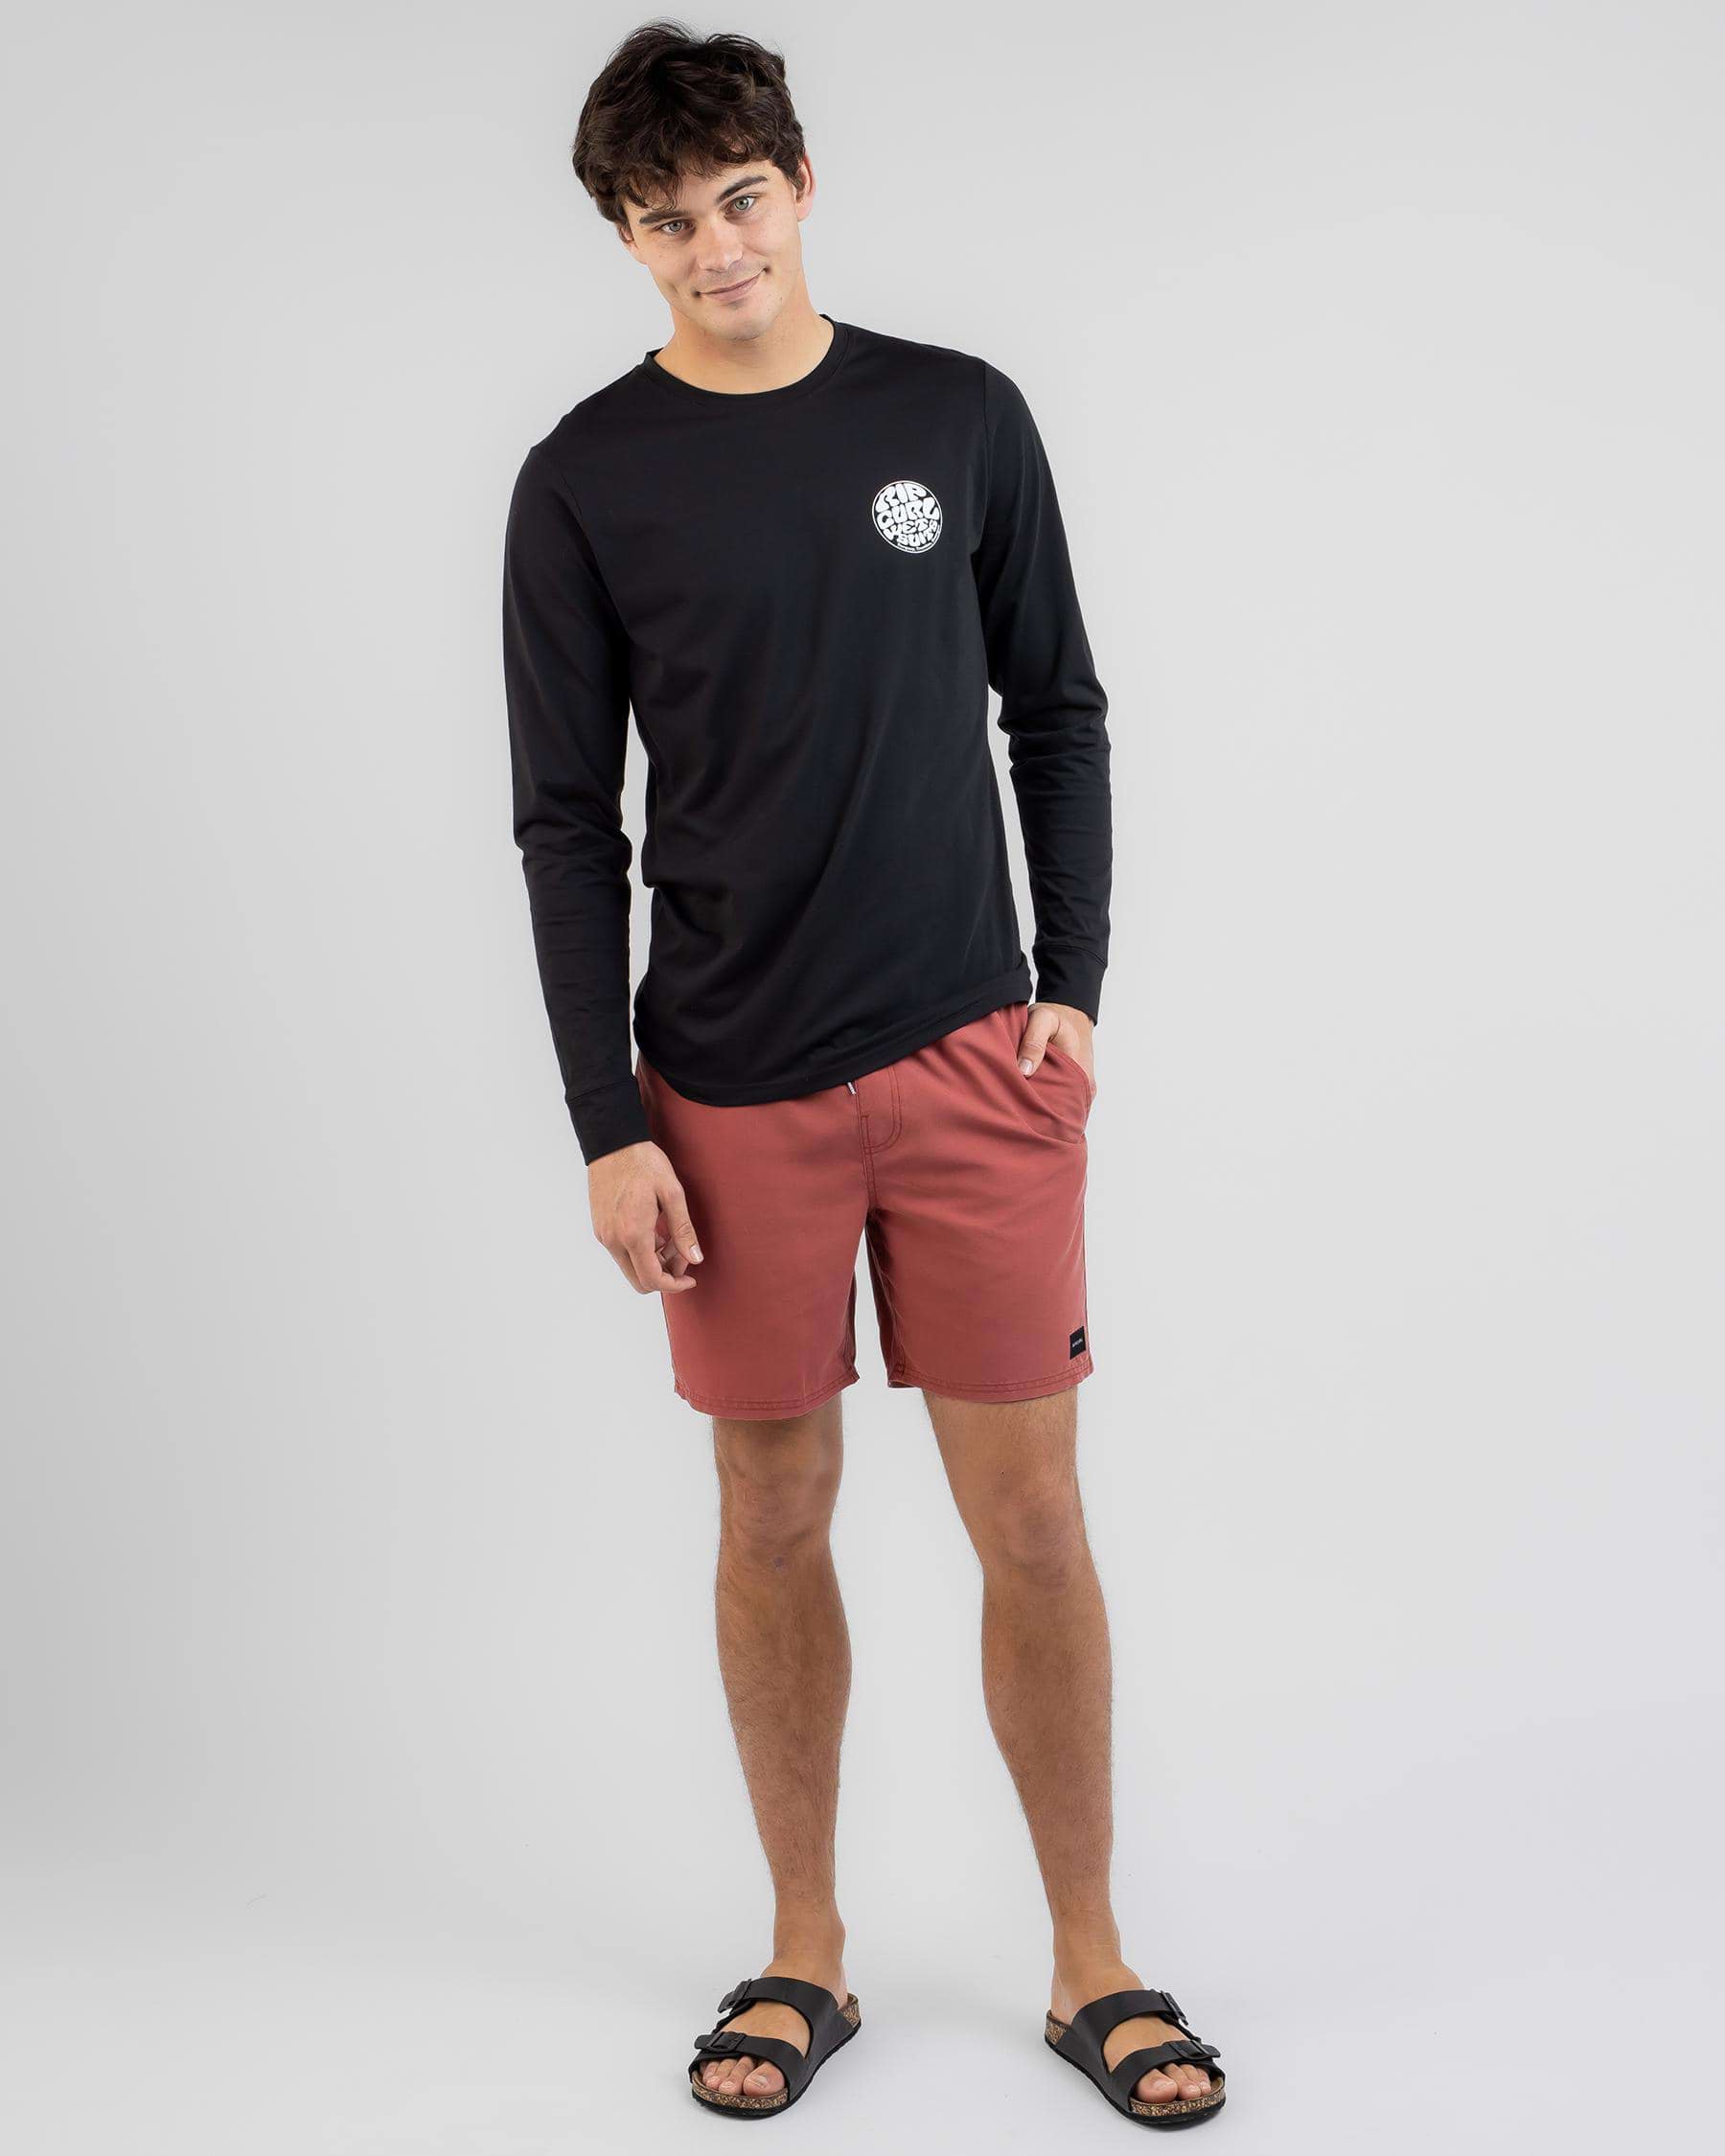 Rip Curl Icons Of Surf Long Sleeve Rash Vest In Black - Fast Shipping ...